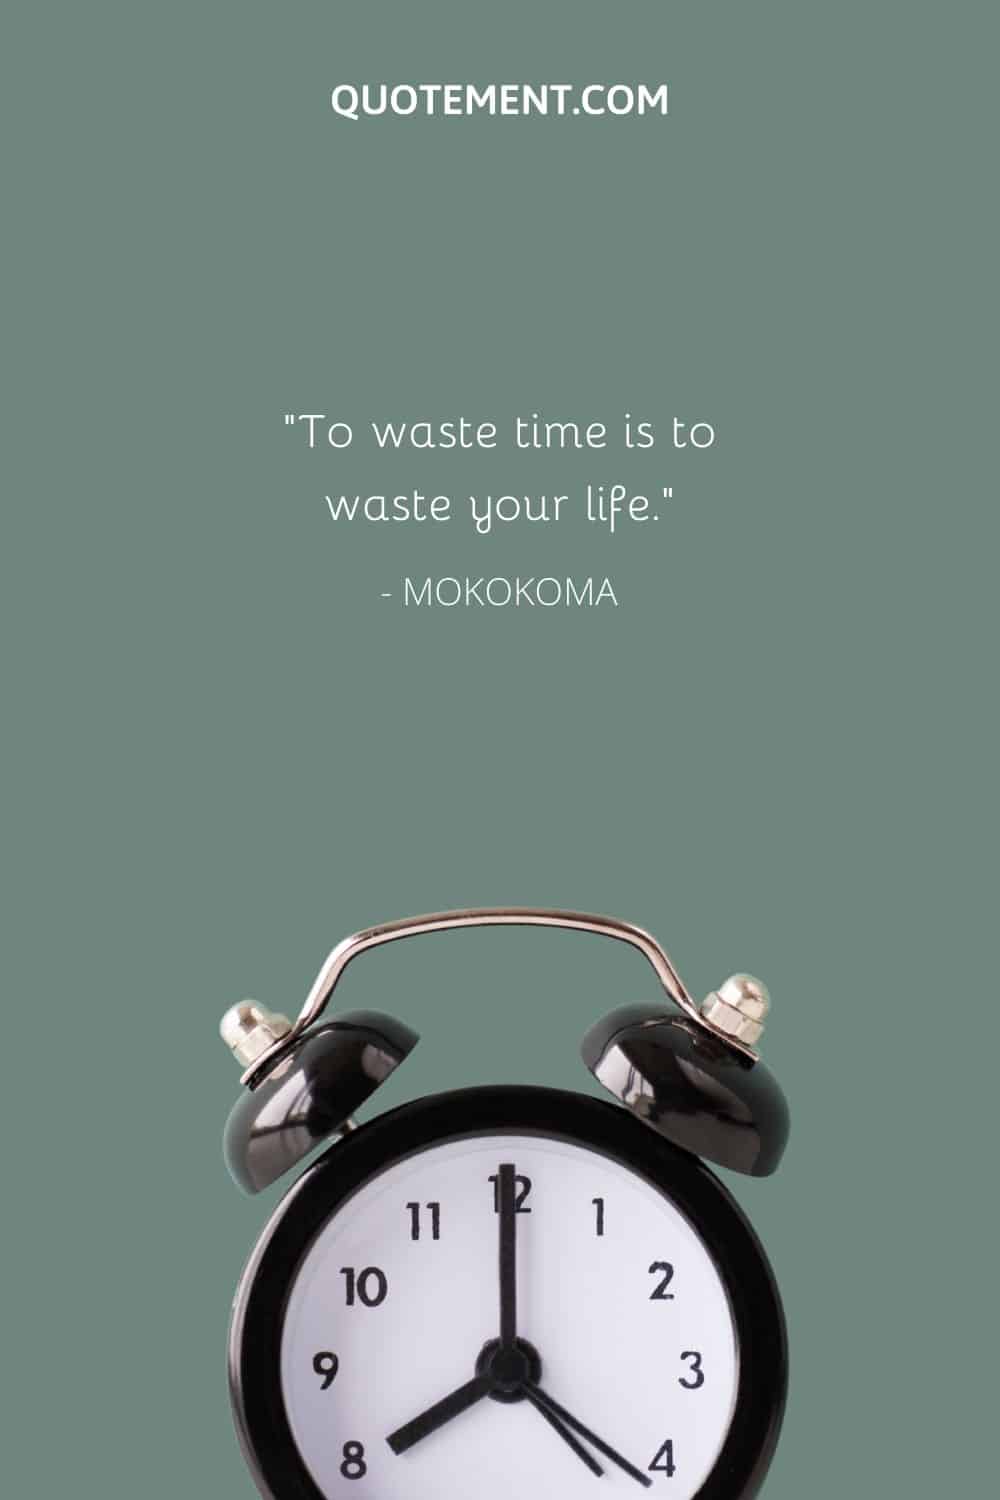 To waste time is to waste your life